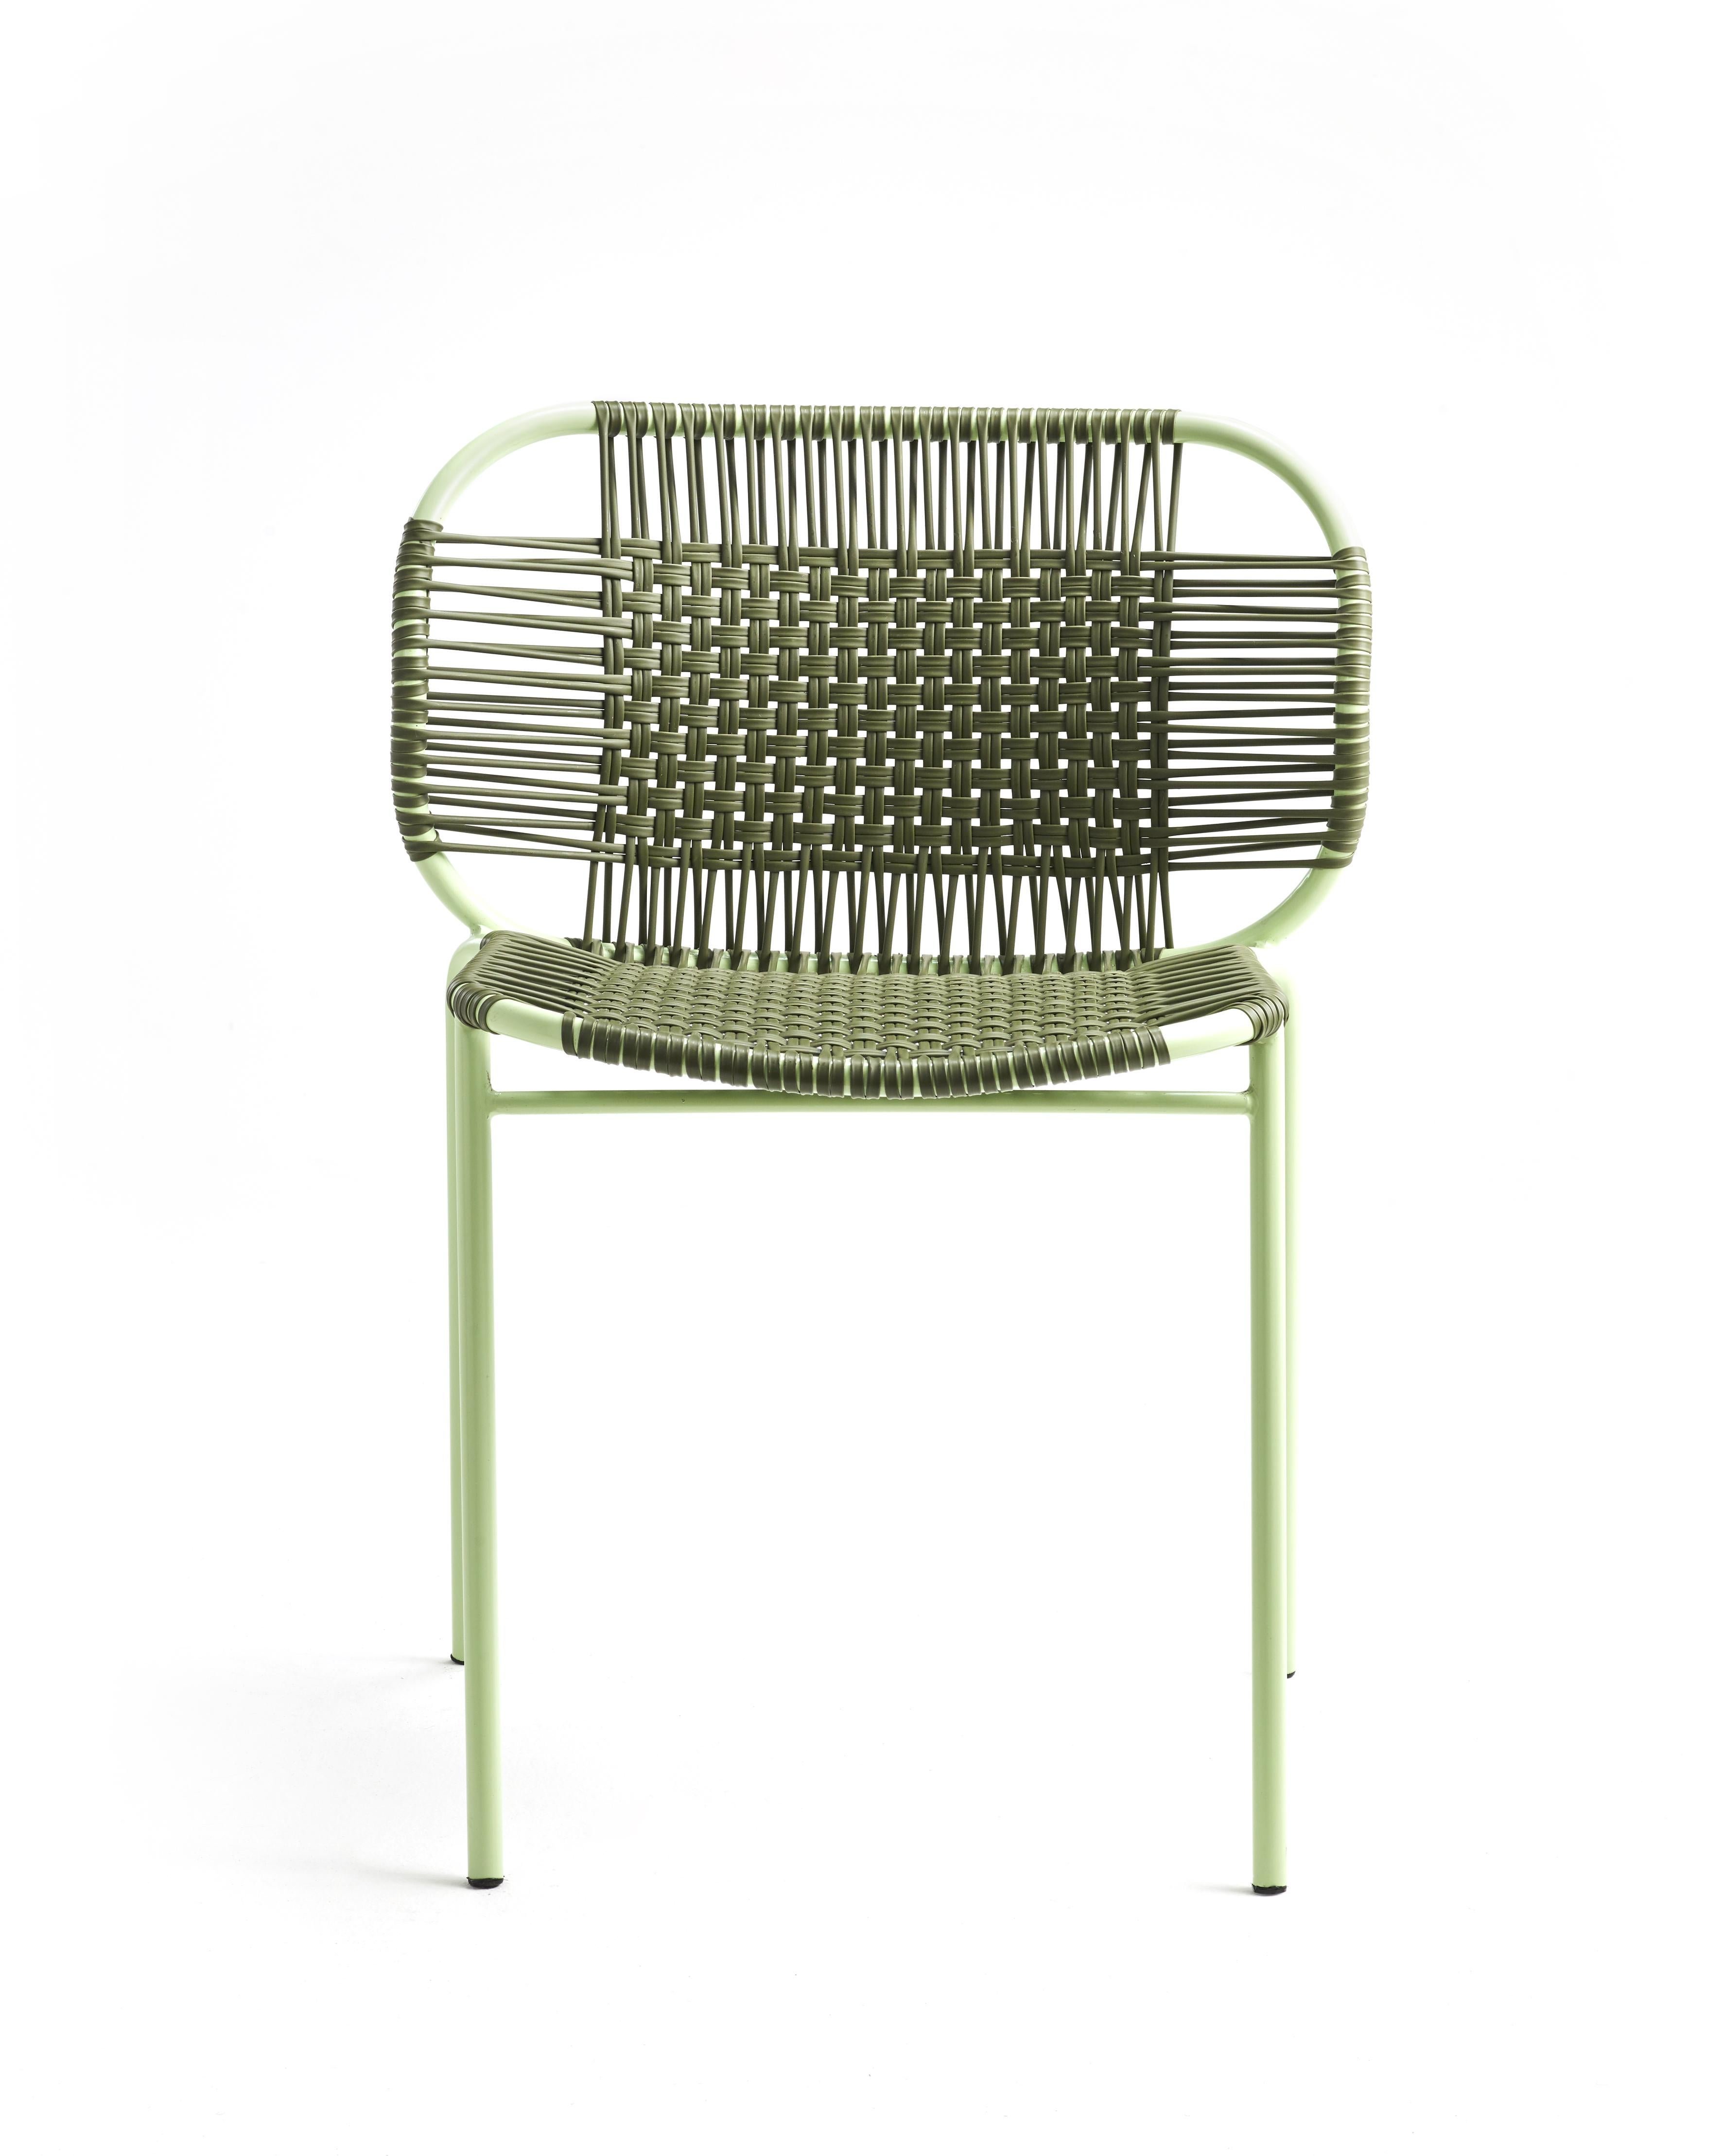 Set of 4 Olive Cielo stacking chair by Sebastian Herkner
Materials: PVC strings, powder-coated steel frame. 
Technique: Made from recycled plastic and weaved by local craftspeople in Cartagena, Colombia. 
Dimensions: W 56 x D 51.4 x H 78 cm